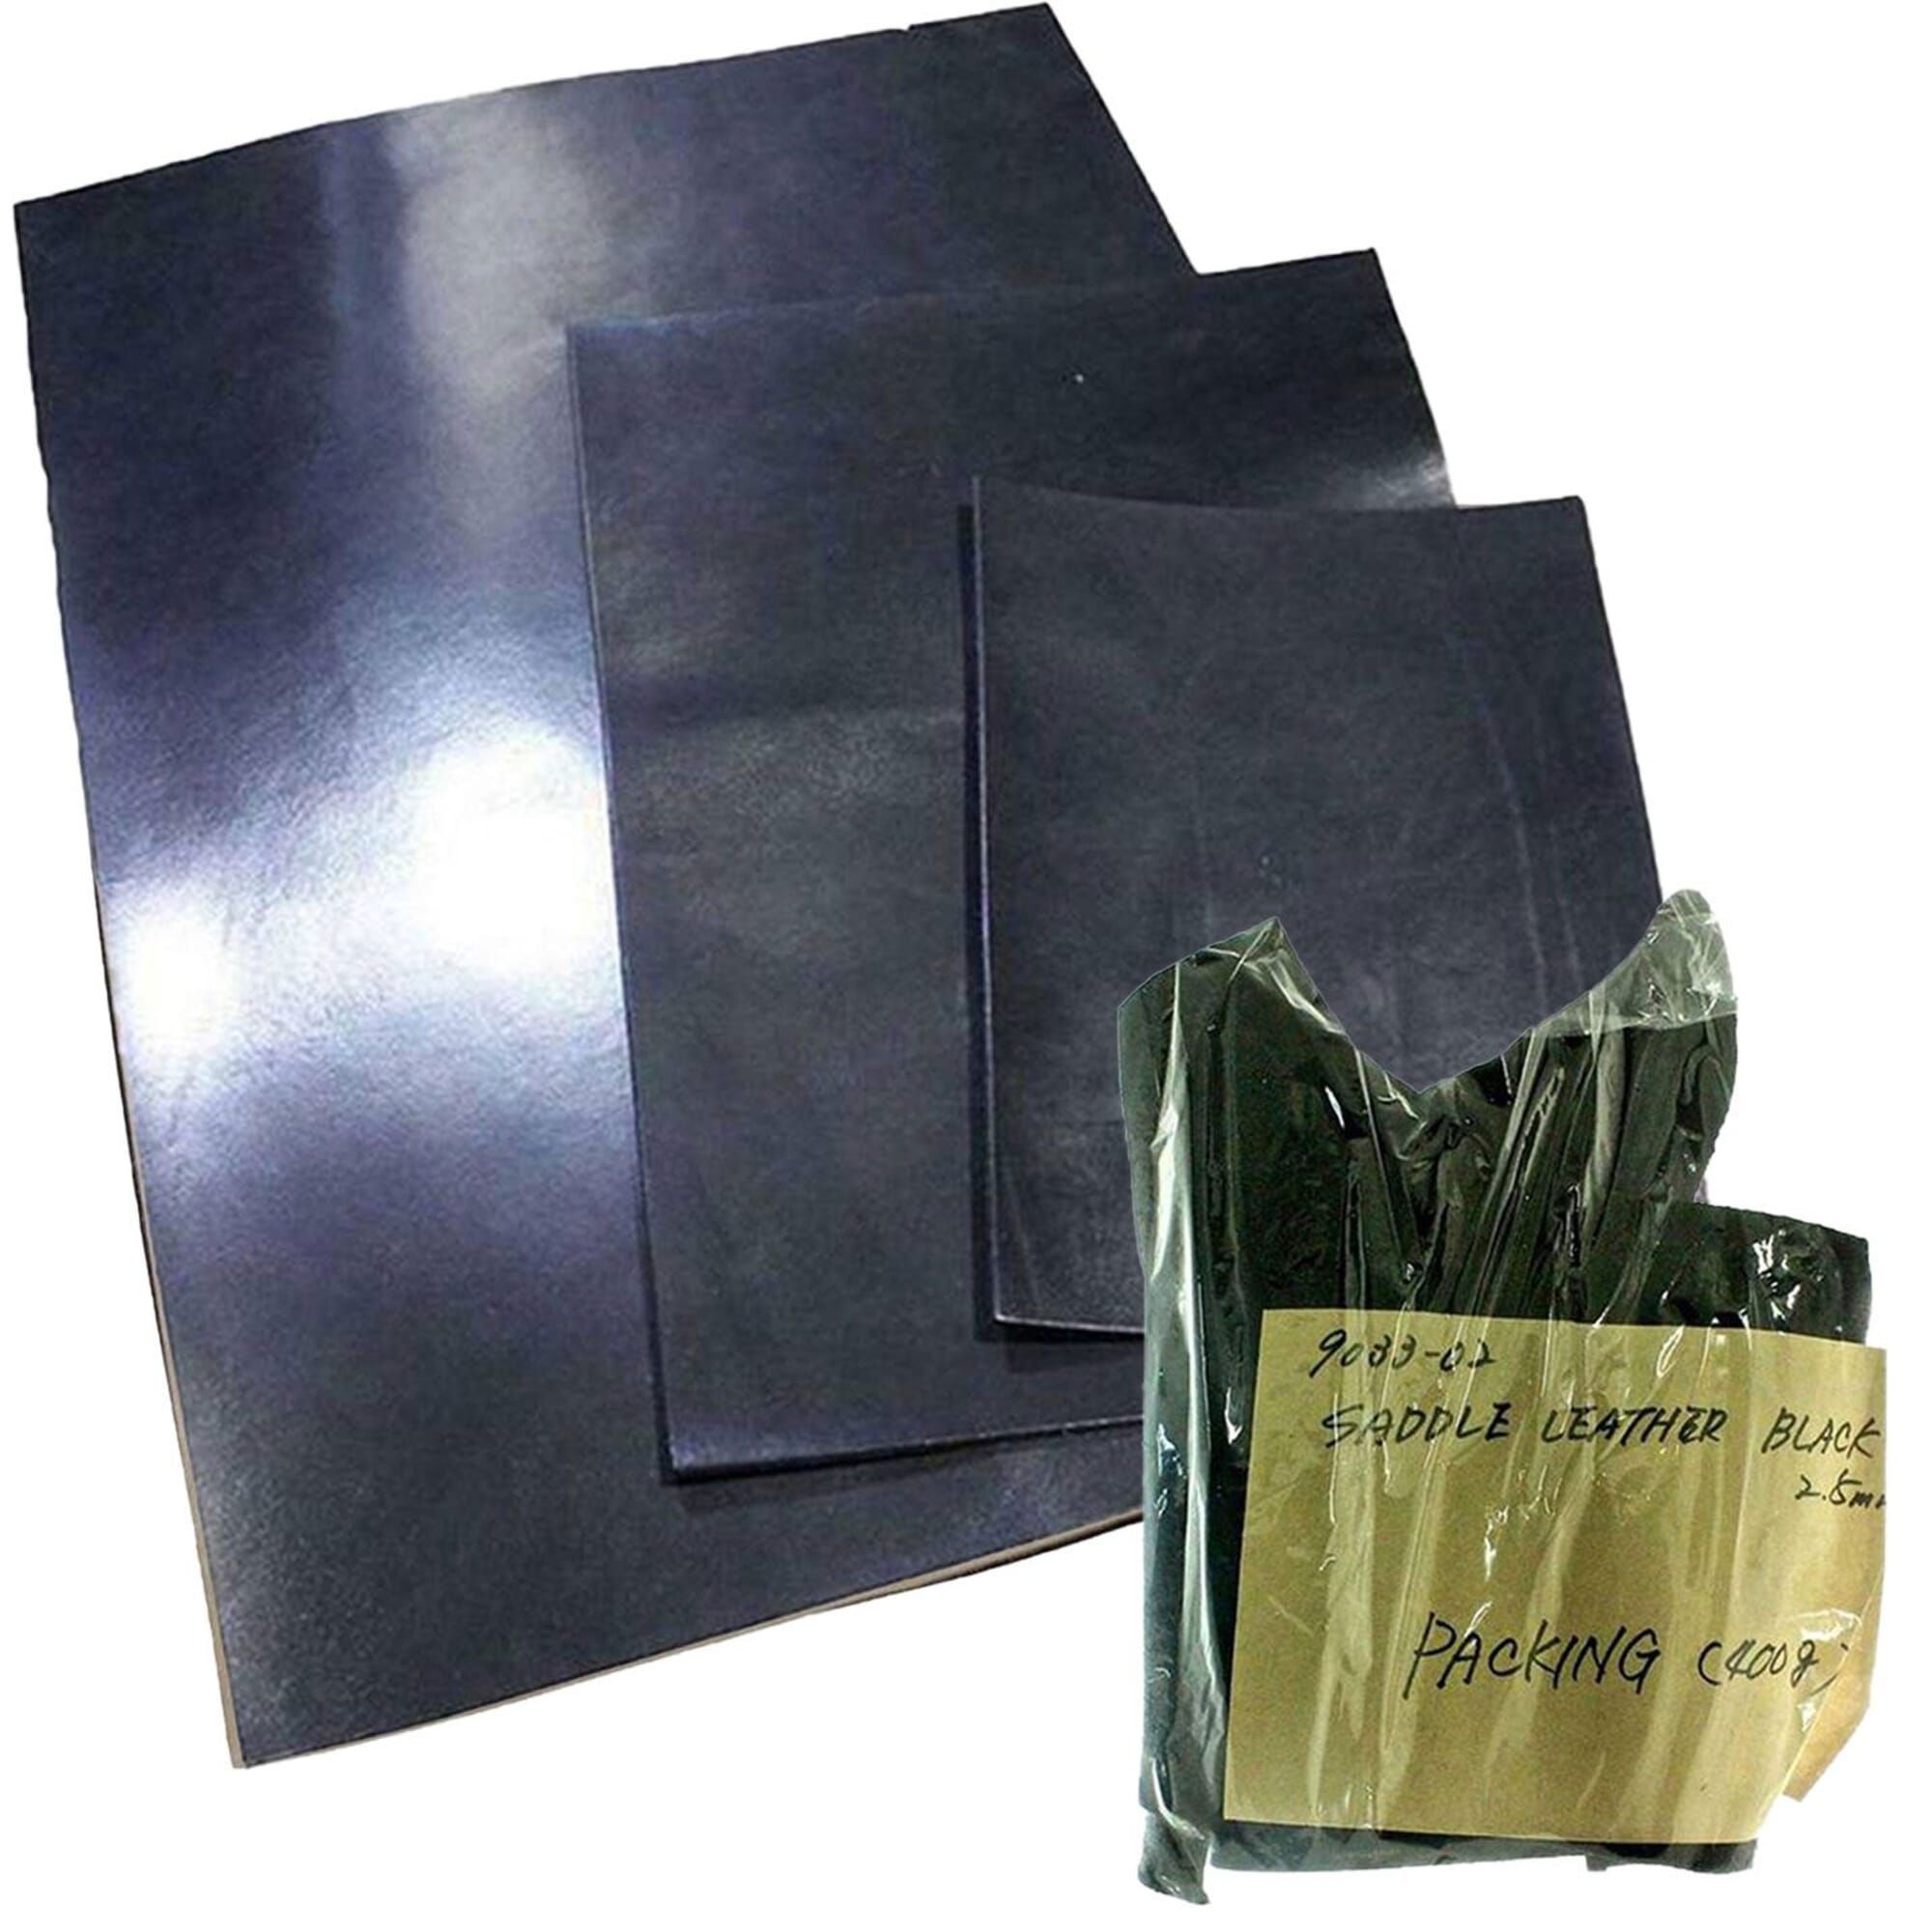 Bundle] Craft Sha Leathercraft 2.5mm Black Saddle Vegetable Tanned Cowhide Tooling  Leather, with A2-A4 Size & 400g Scrap, for Leatherworking